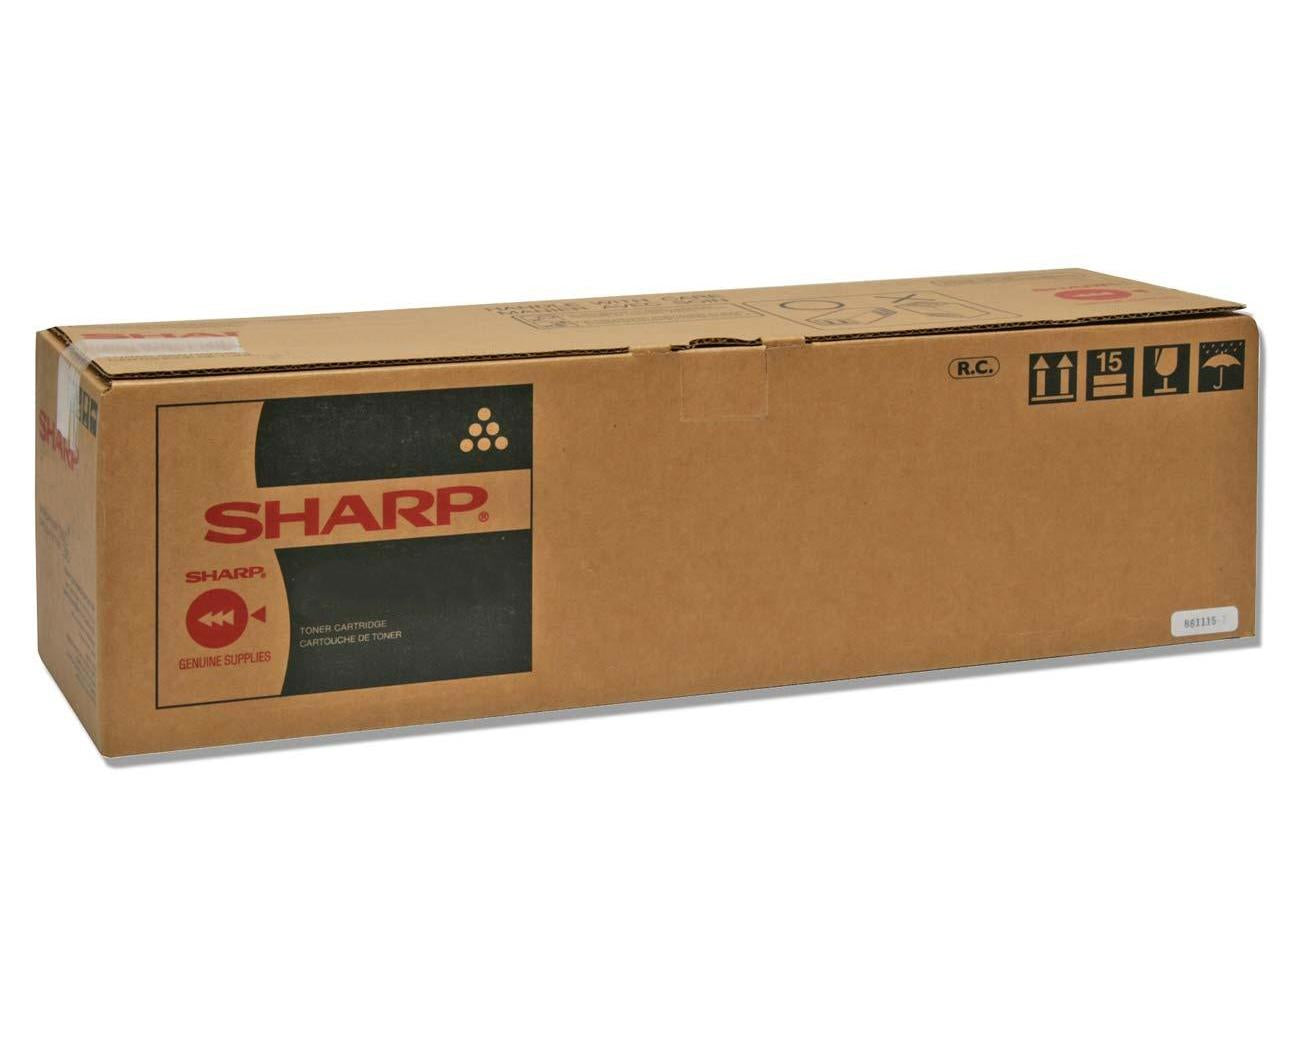 Sharp MX-510MK Charger-Kit, 150K pages for Sharp MX 4112